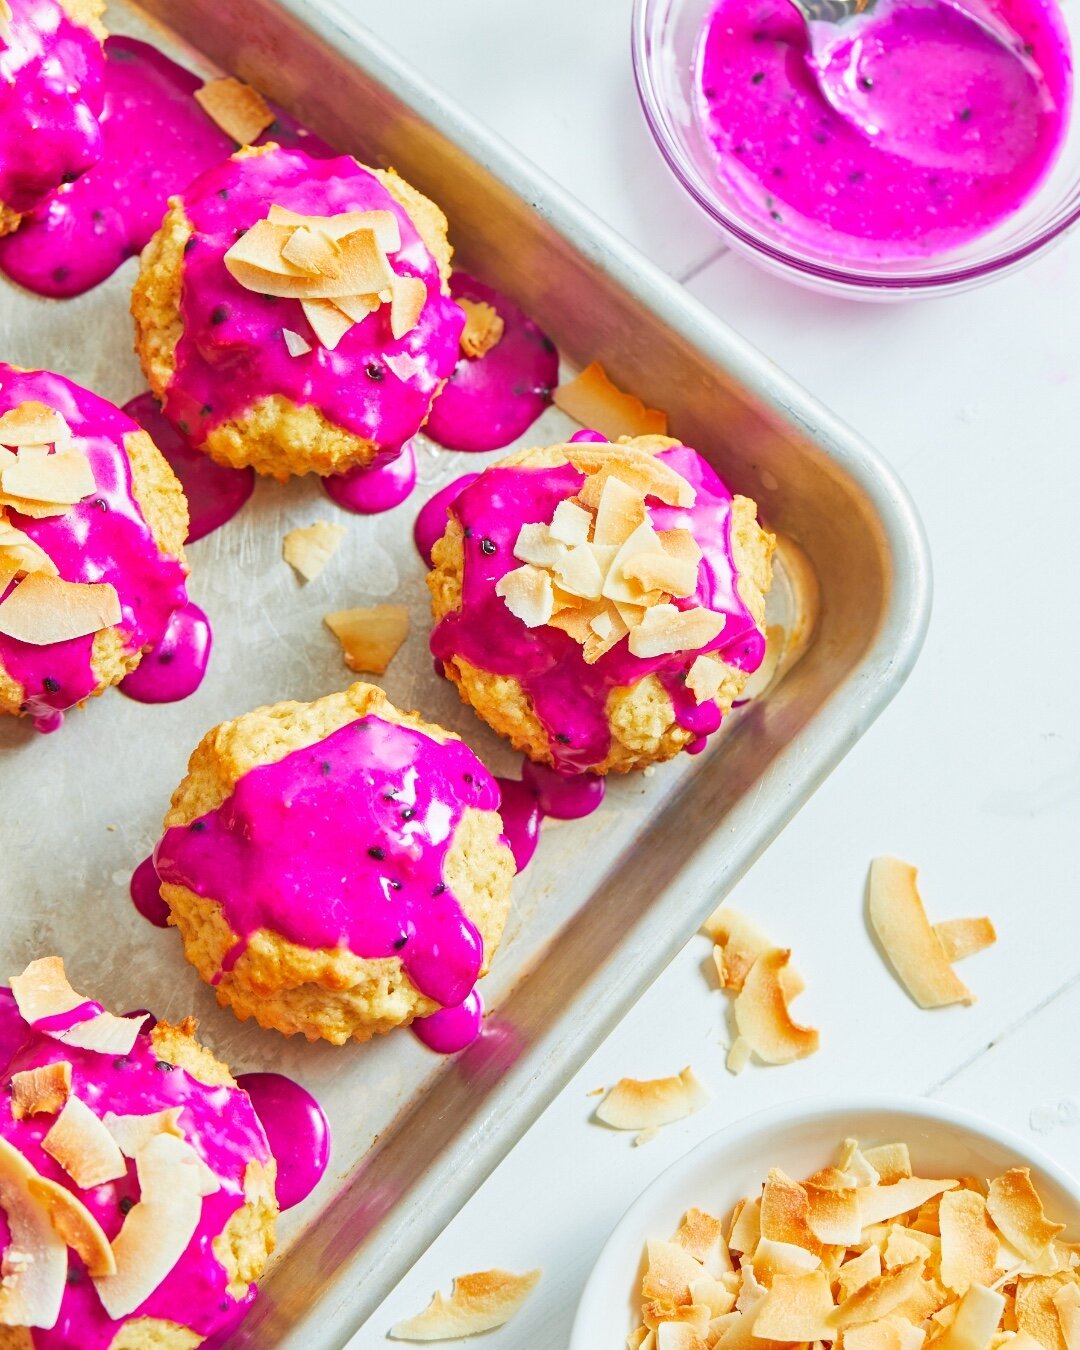 If you're ever wondering what treat you could make for breakfast/snack/dessert, I recommend that it include a dragonfruit icing. It's guaranteed to brighten your day and your tastebuds. 
. 
Coconut Muffins with Dragonfruit Glaze made for @Ripple by @